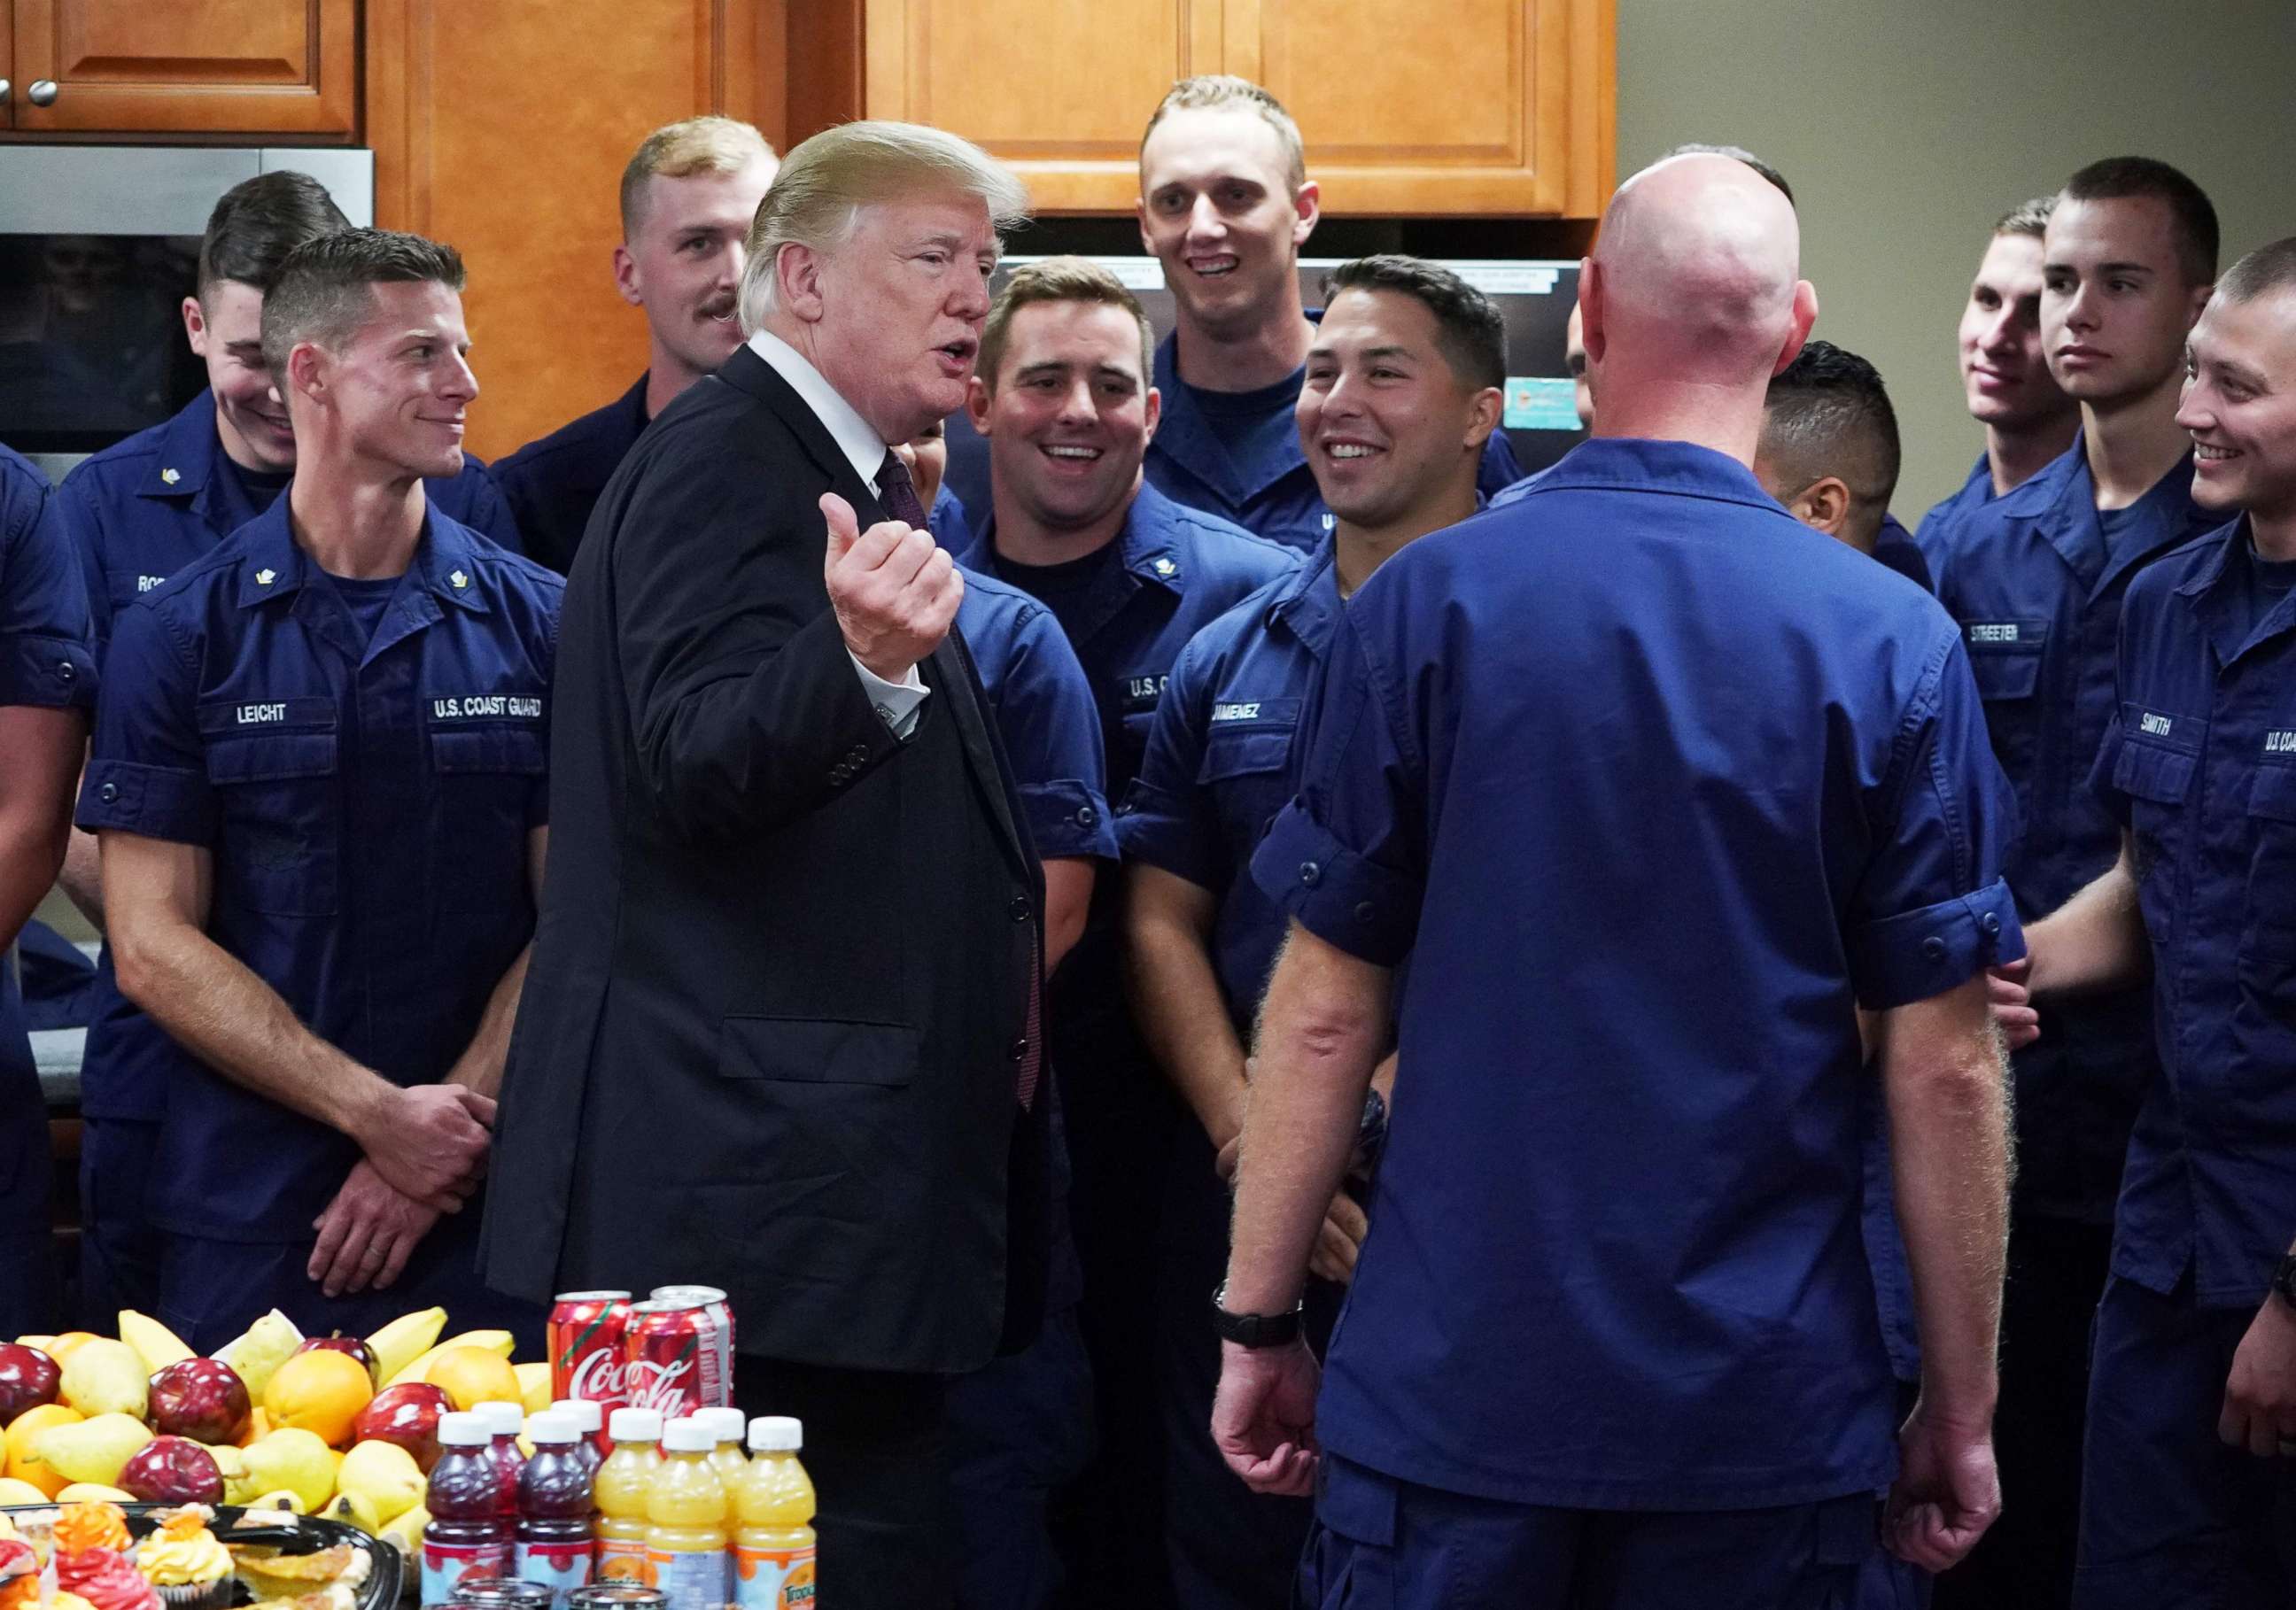 PHOTO: President Donald Trump visits with personnel at US Coast Guard Station Lake Worth Inlet in Riviera Beach, Fla., on Thanksgiving Day, Nov. 22, 2018.